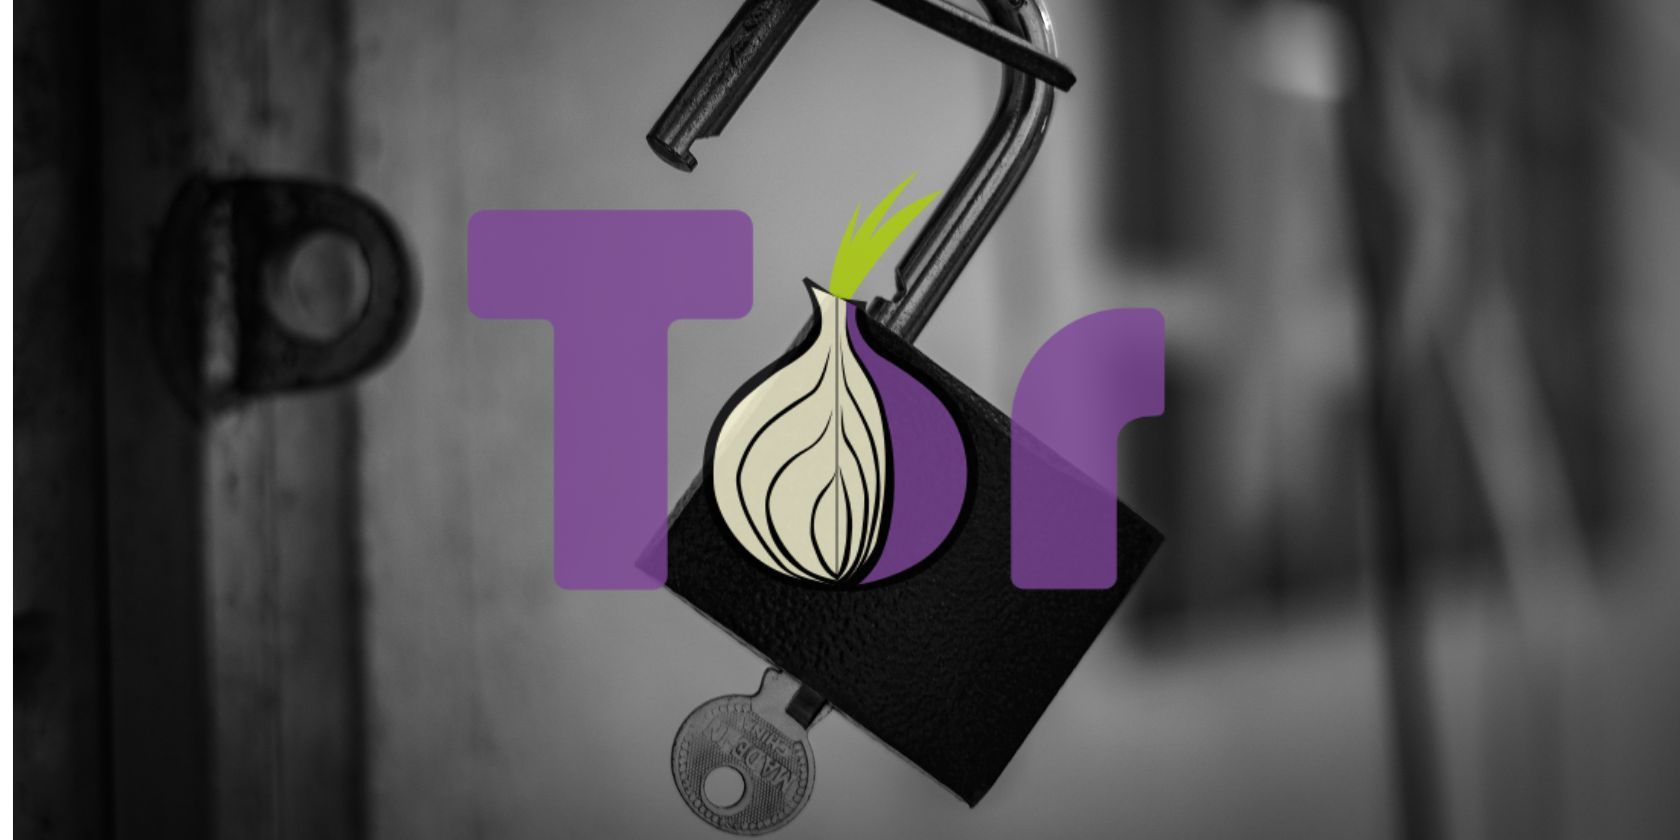 tor logo on front of unlocked padlock with key inserted